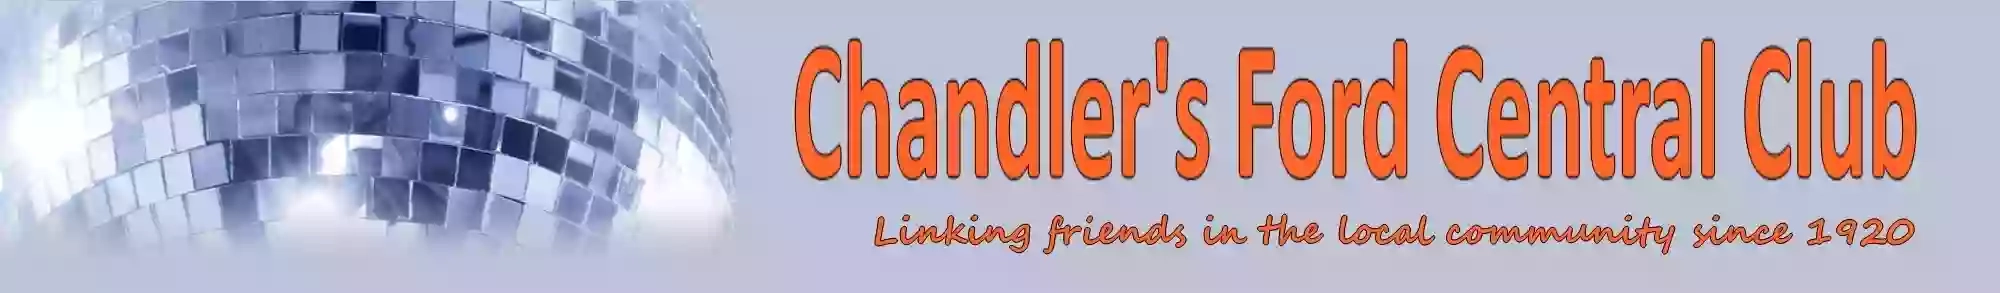 Chandlers Ford Central Club & Institute Ltd